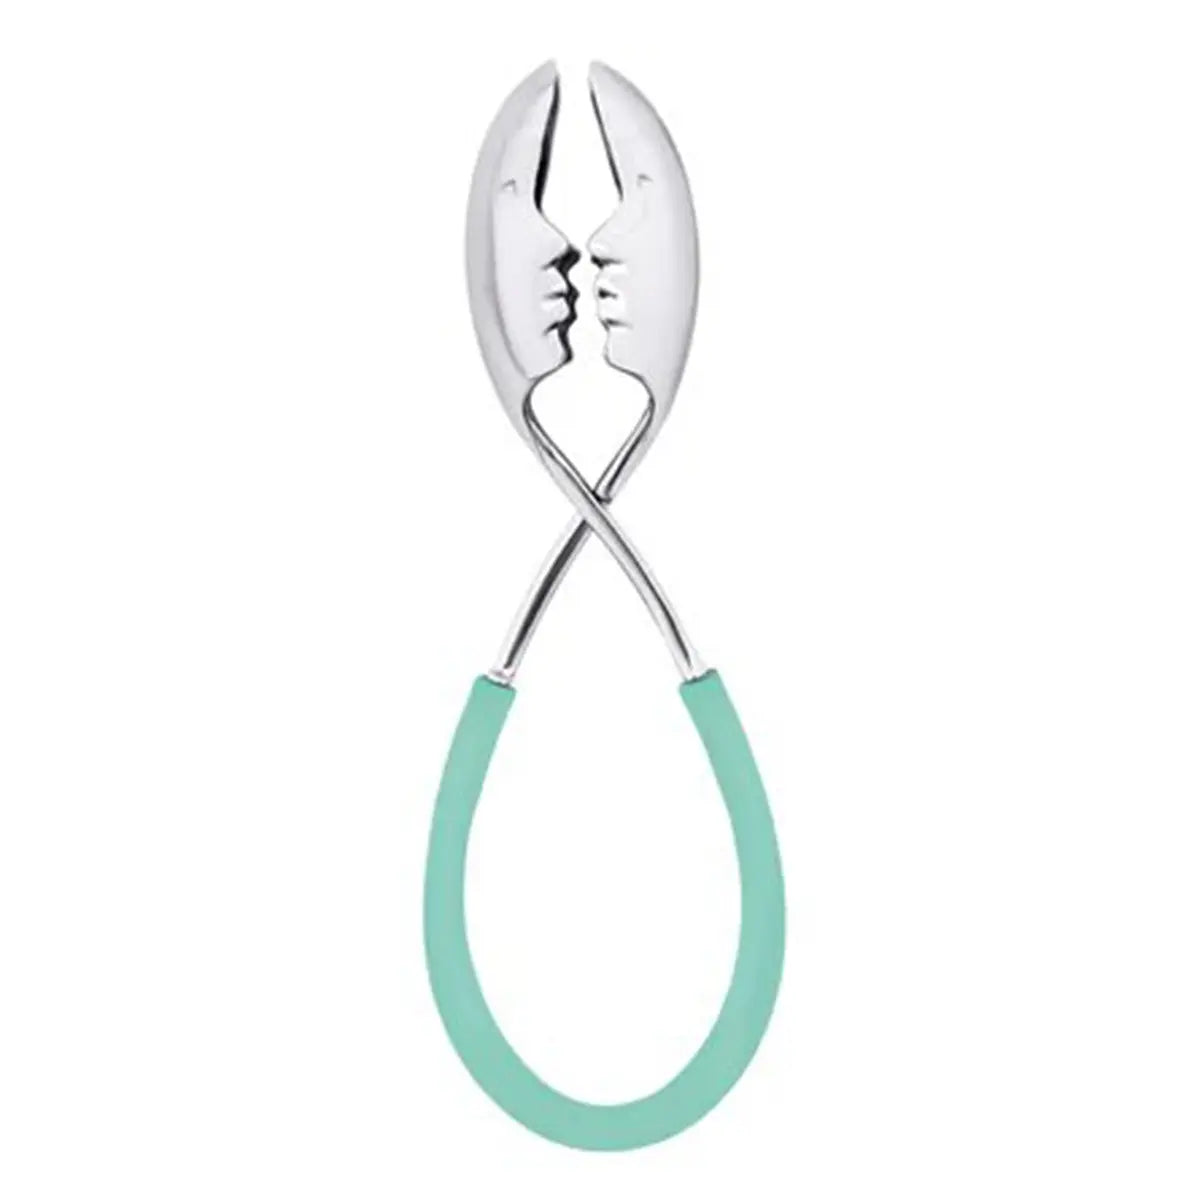 Casa Bugatti Molla Kiss Colored Polypropylene with Chrome Salad Tongs in Turquoise